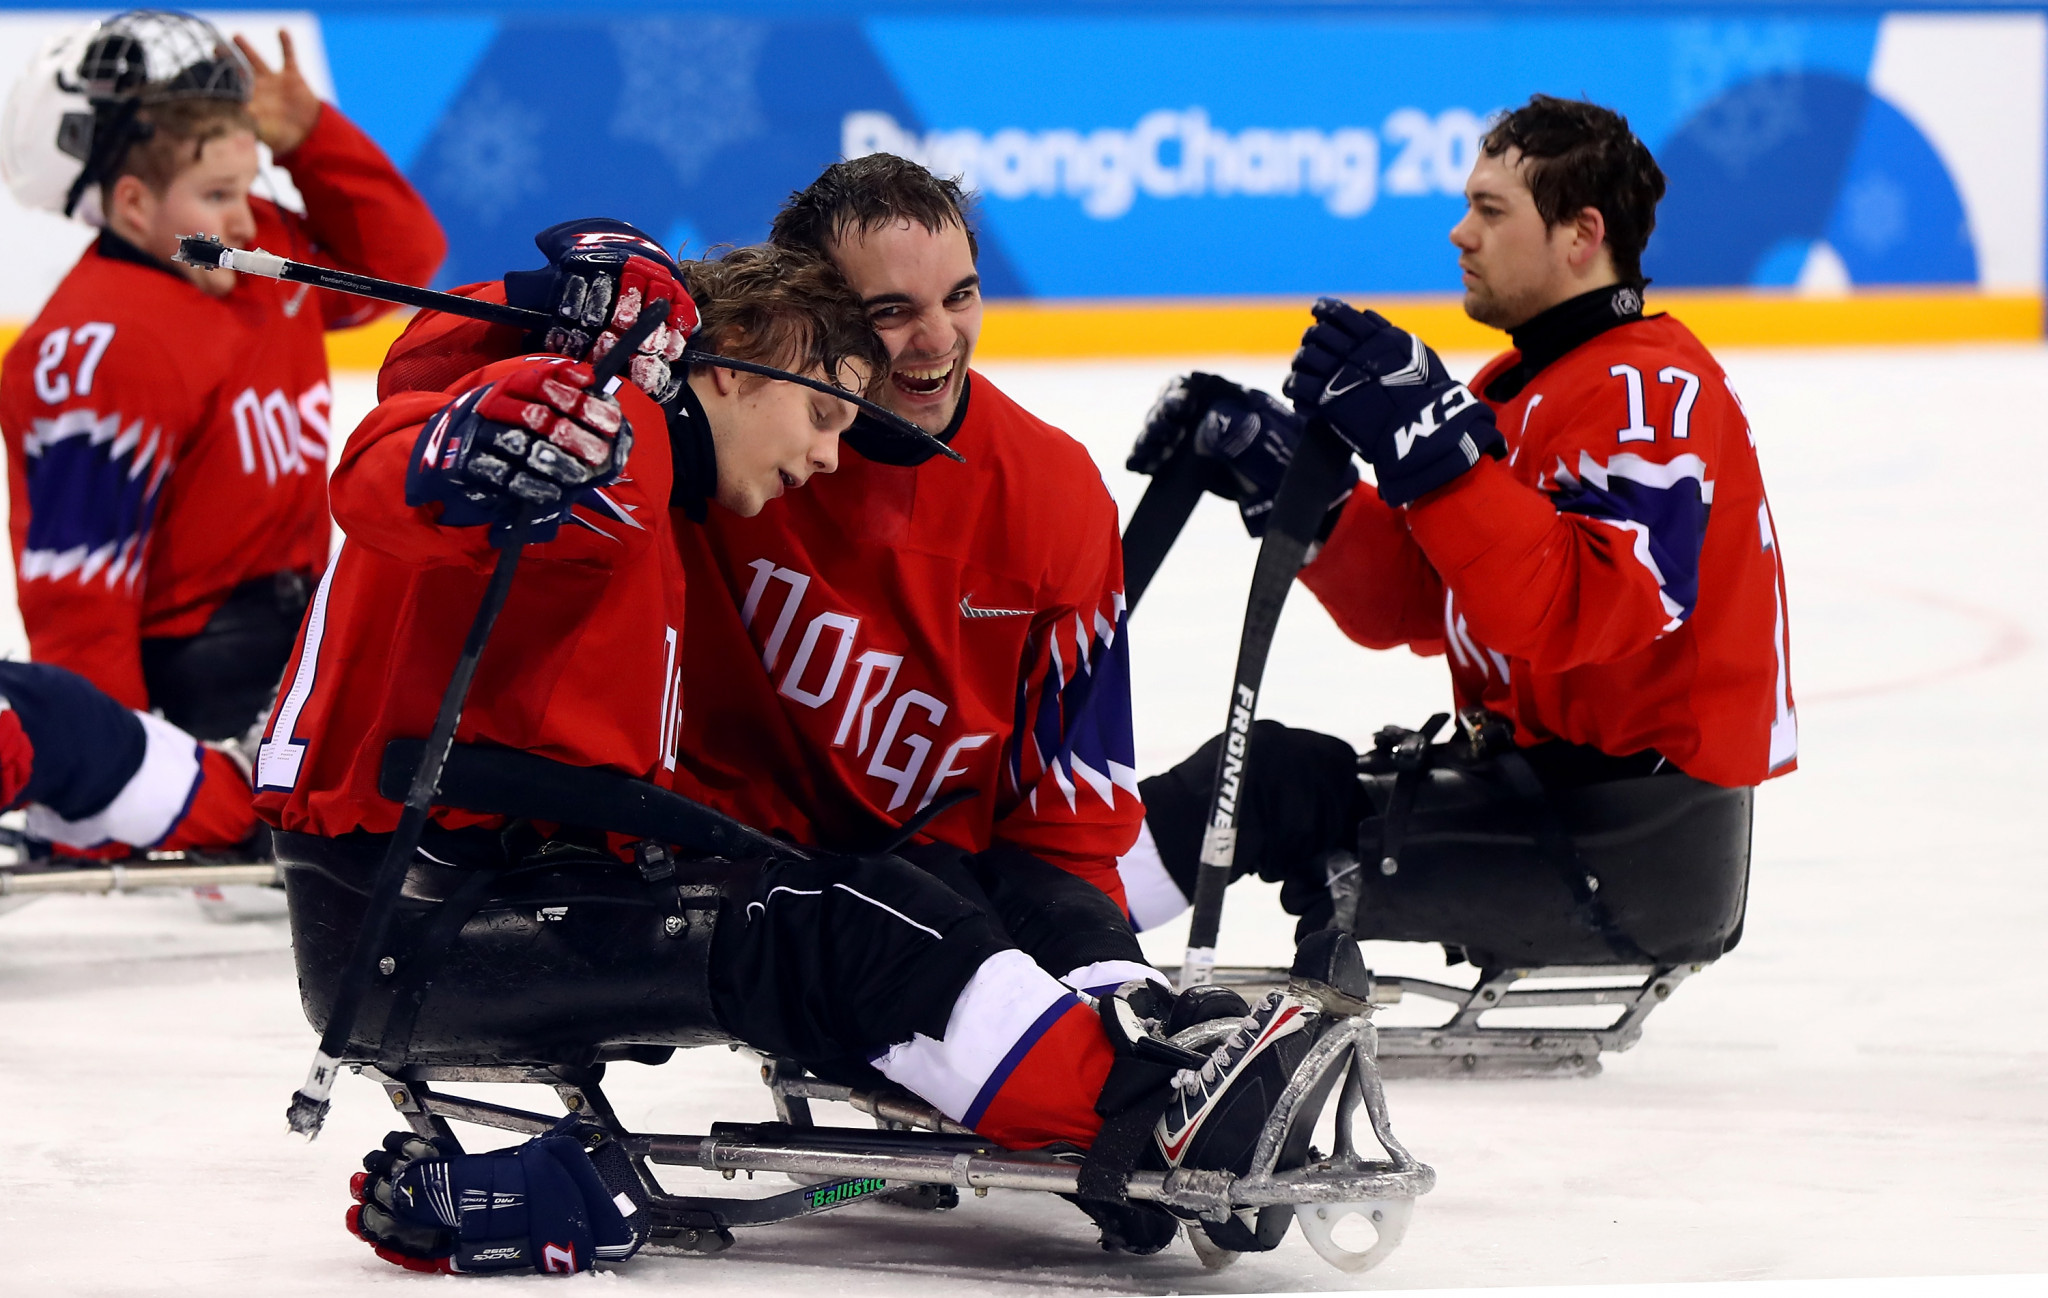 Norway, the bronze medallists in 2016, are among the eight teams set to compete at the 2020 World Para Ice Hockey European Championships ©Getty Images